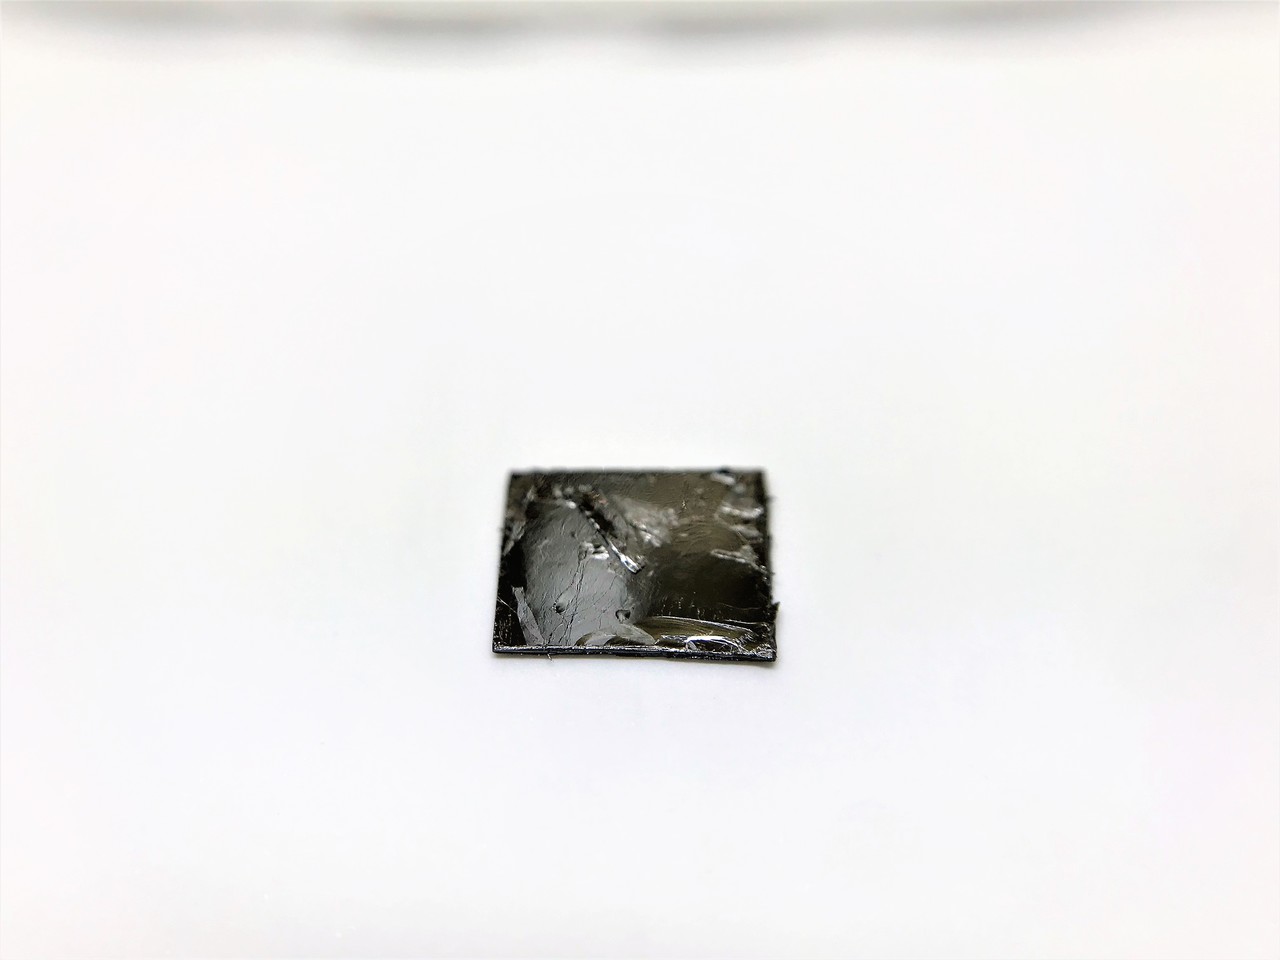 Highly Oriented Pyrolytic Graphite